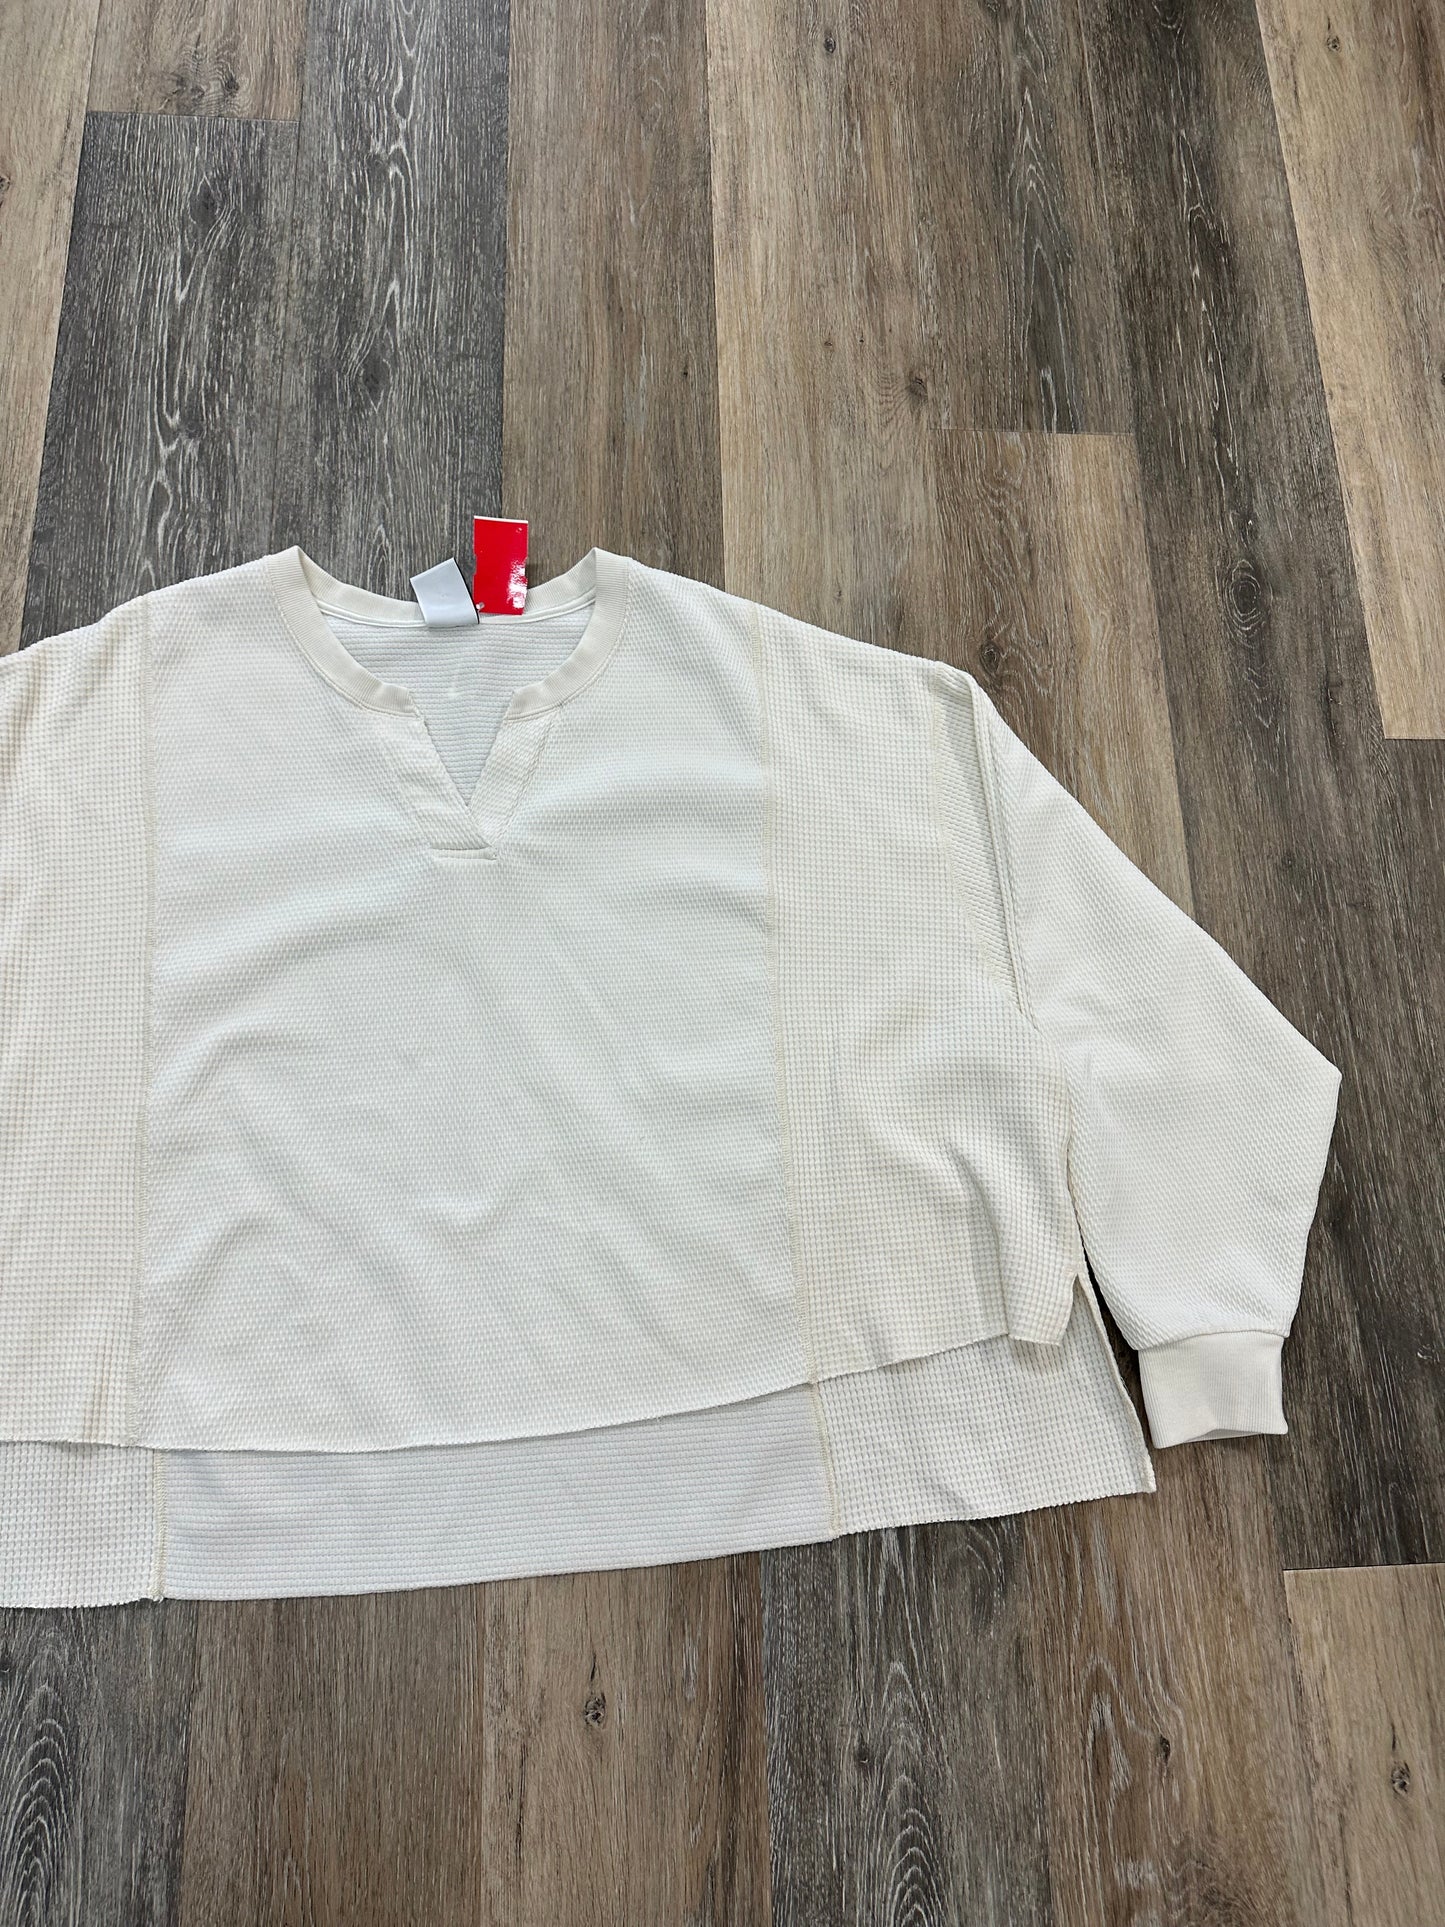 White Athletic Top Long Sleeve Collar Nike Apparel, Size 2x